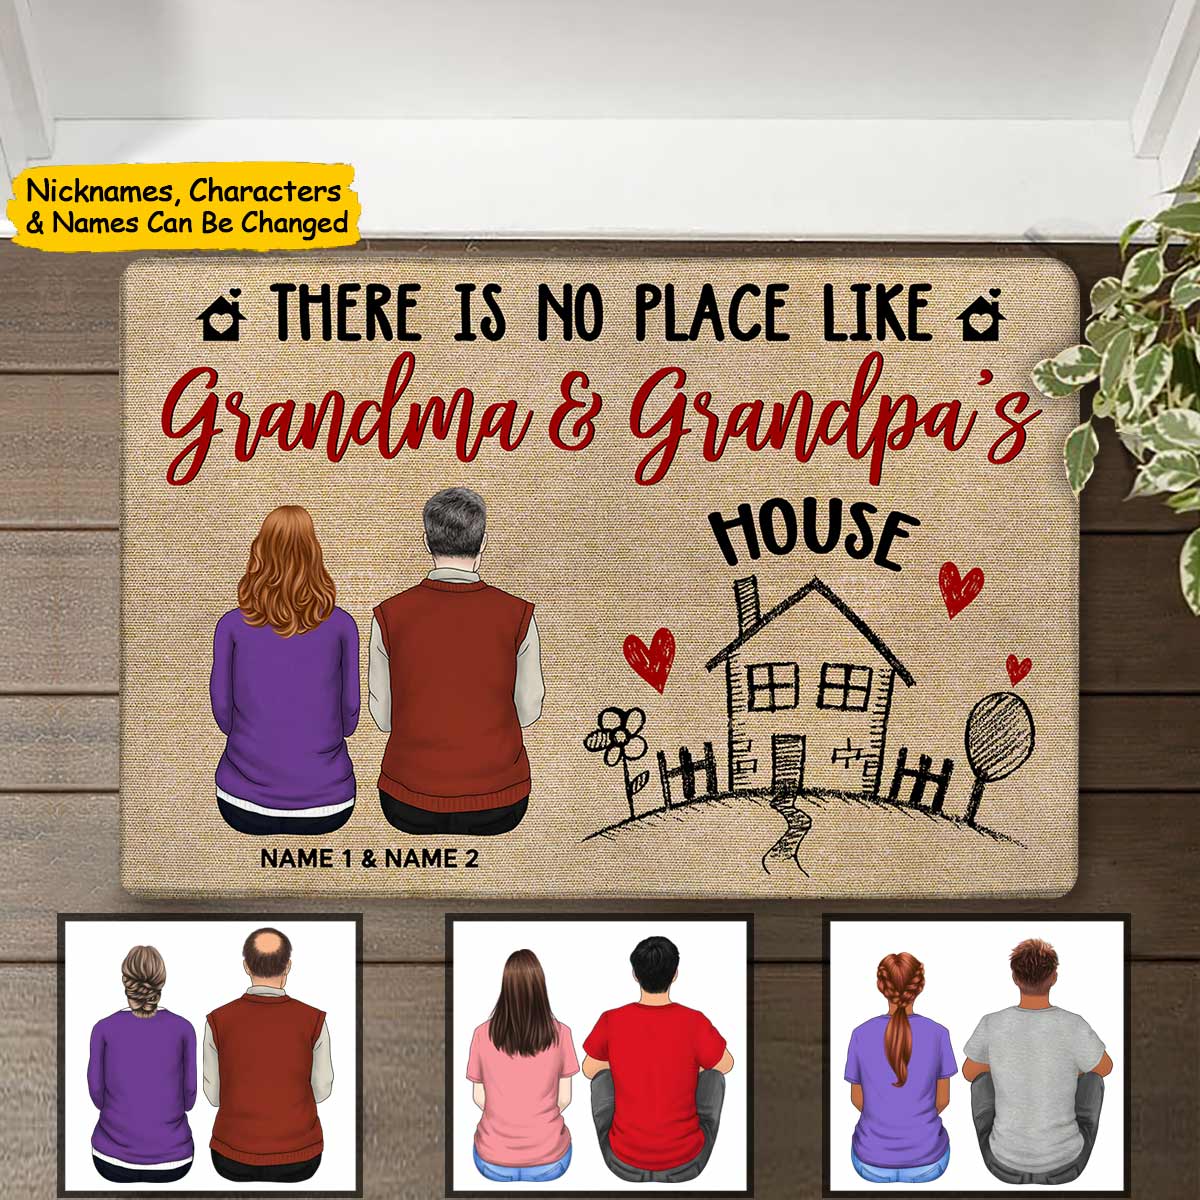 There Is No Place Like Grandma And Grandpa's House, Love Grandkids Personalized Doormat For Grandma and Grandpa HN98 DO99